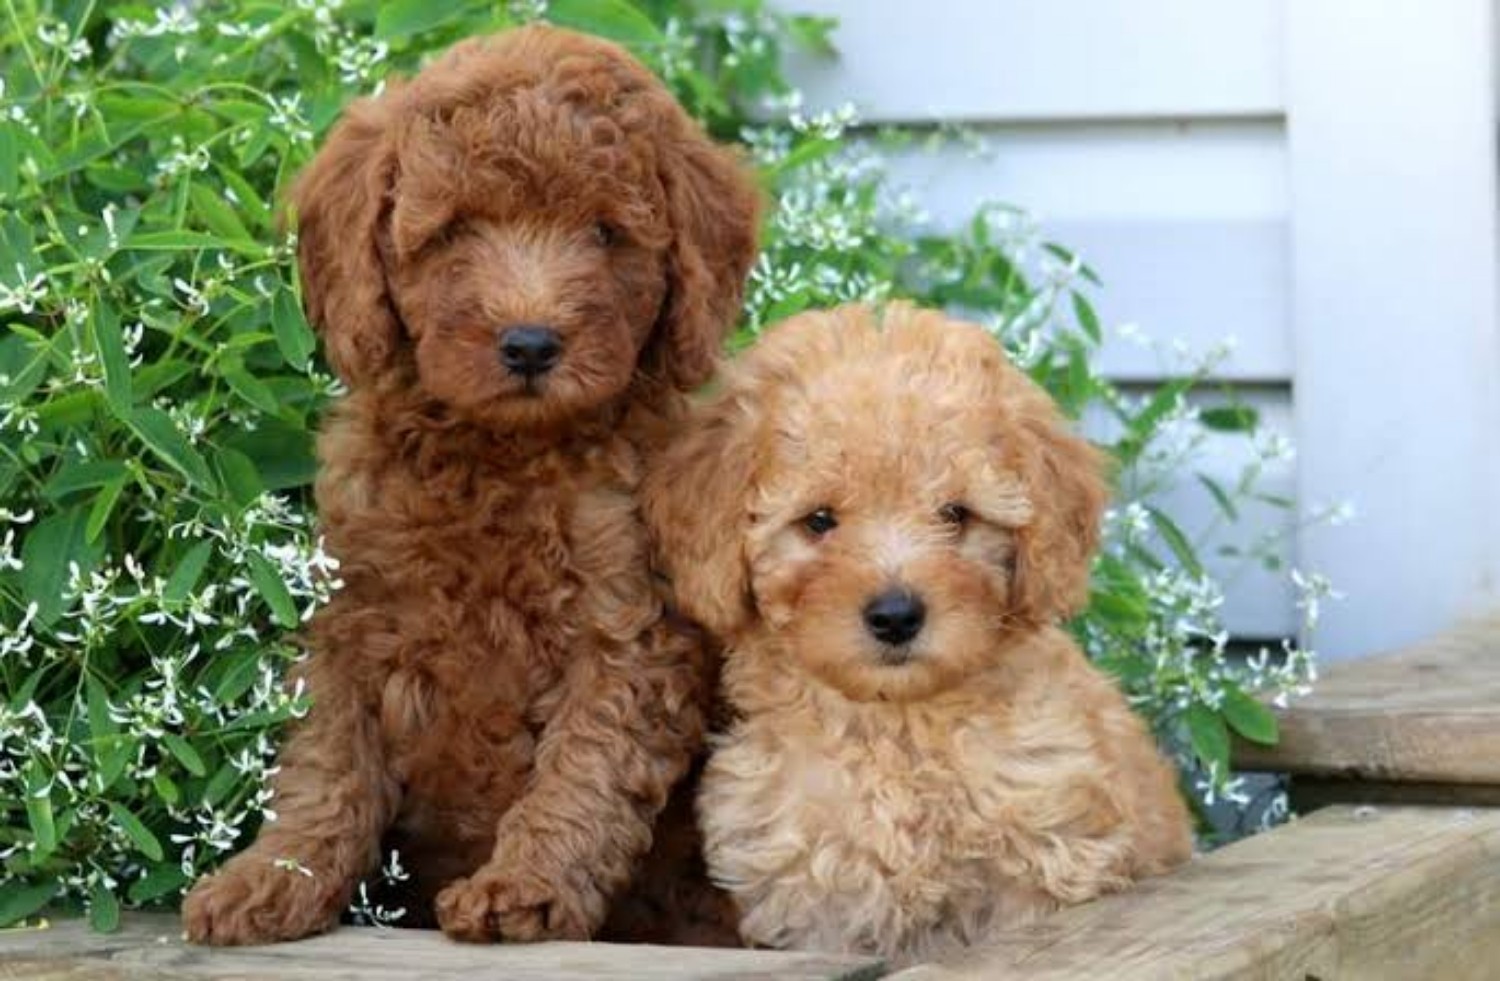 Miniature Poodle Dog Breed Information, Images, Characteristics, Health